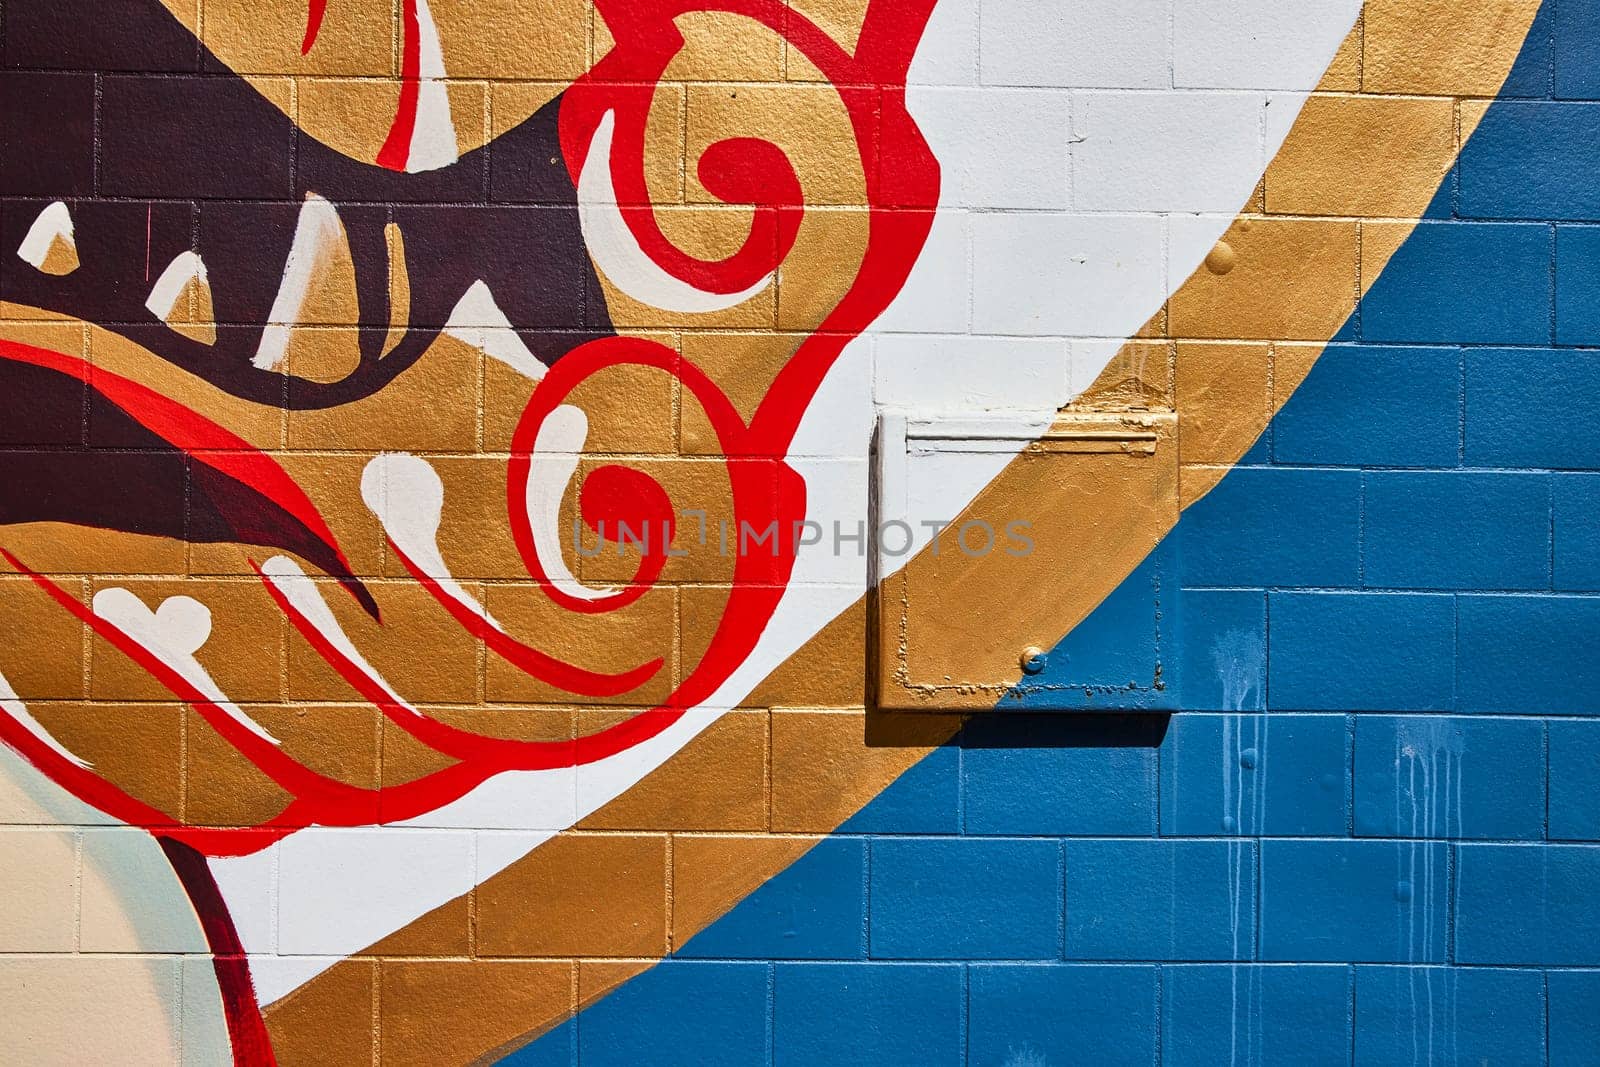 Colorful urban mural in downtown Fort Wayne, Indiana, showcasing vibrant abstract art on a brick wall.